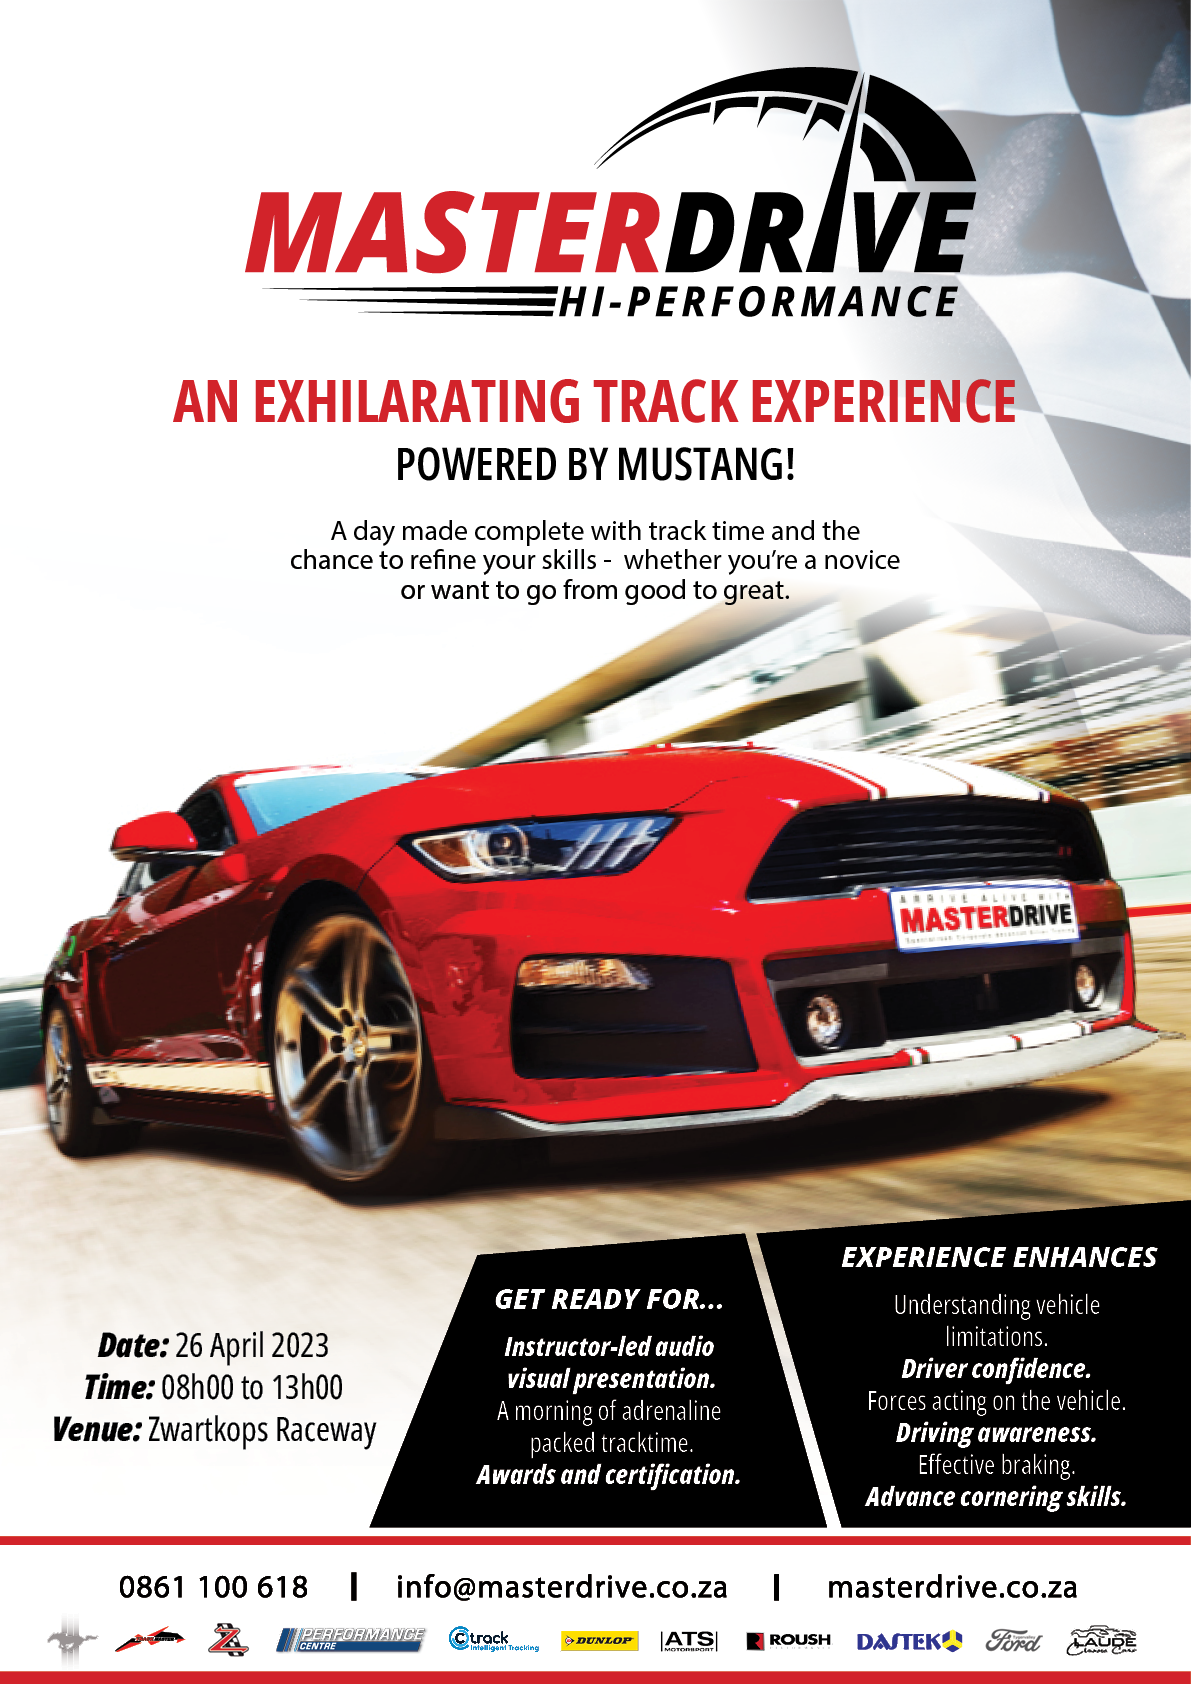 MasterDrive invites drivers to the upcoming Hi-Performance Track Experience